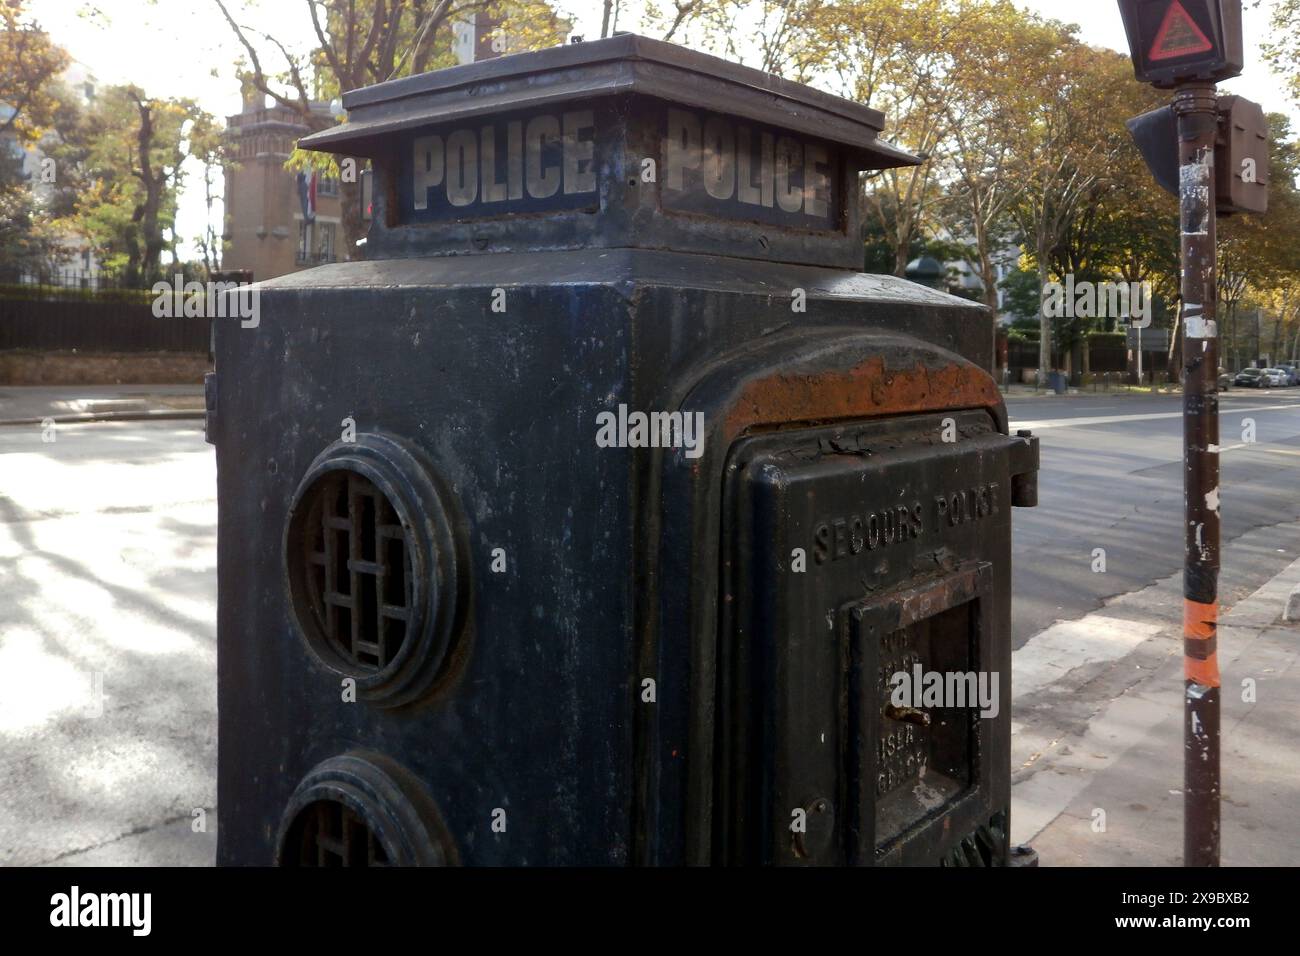 Borne d'appel Police (Police call post) in Neuilly-sur-Seine (Hauts-de-Seine), just outside of Paris. Stock Photo